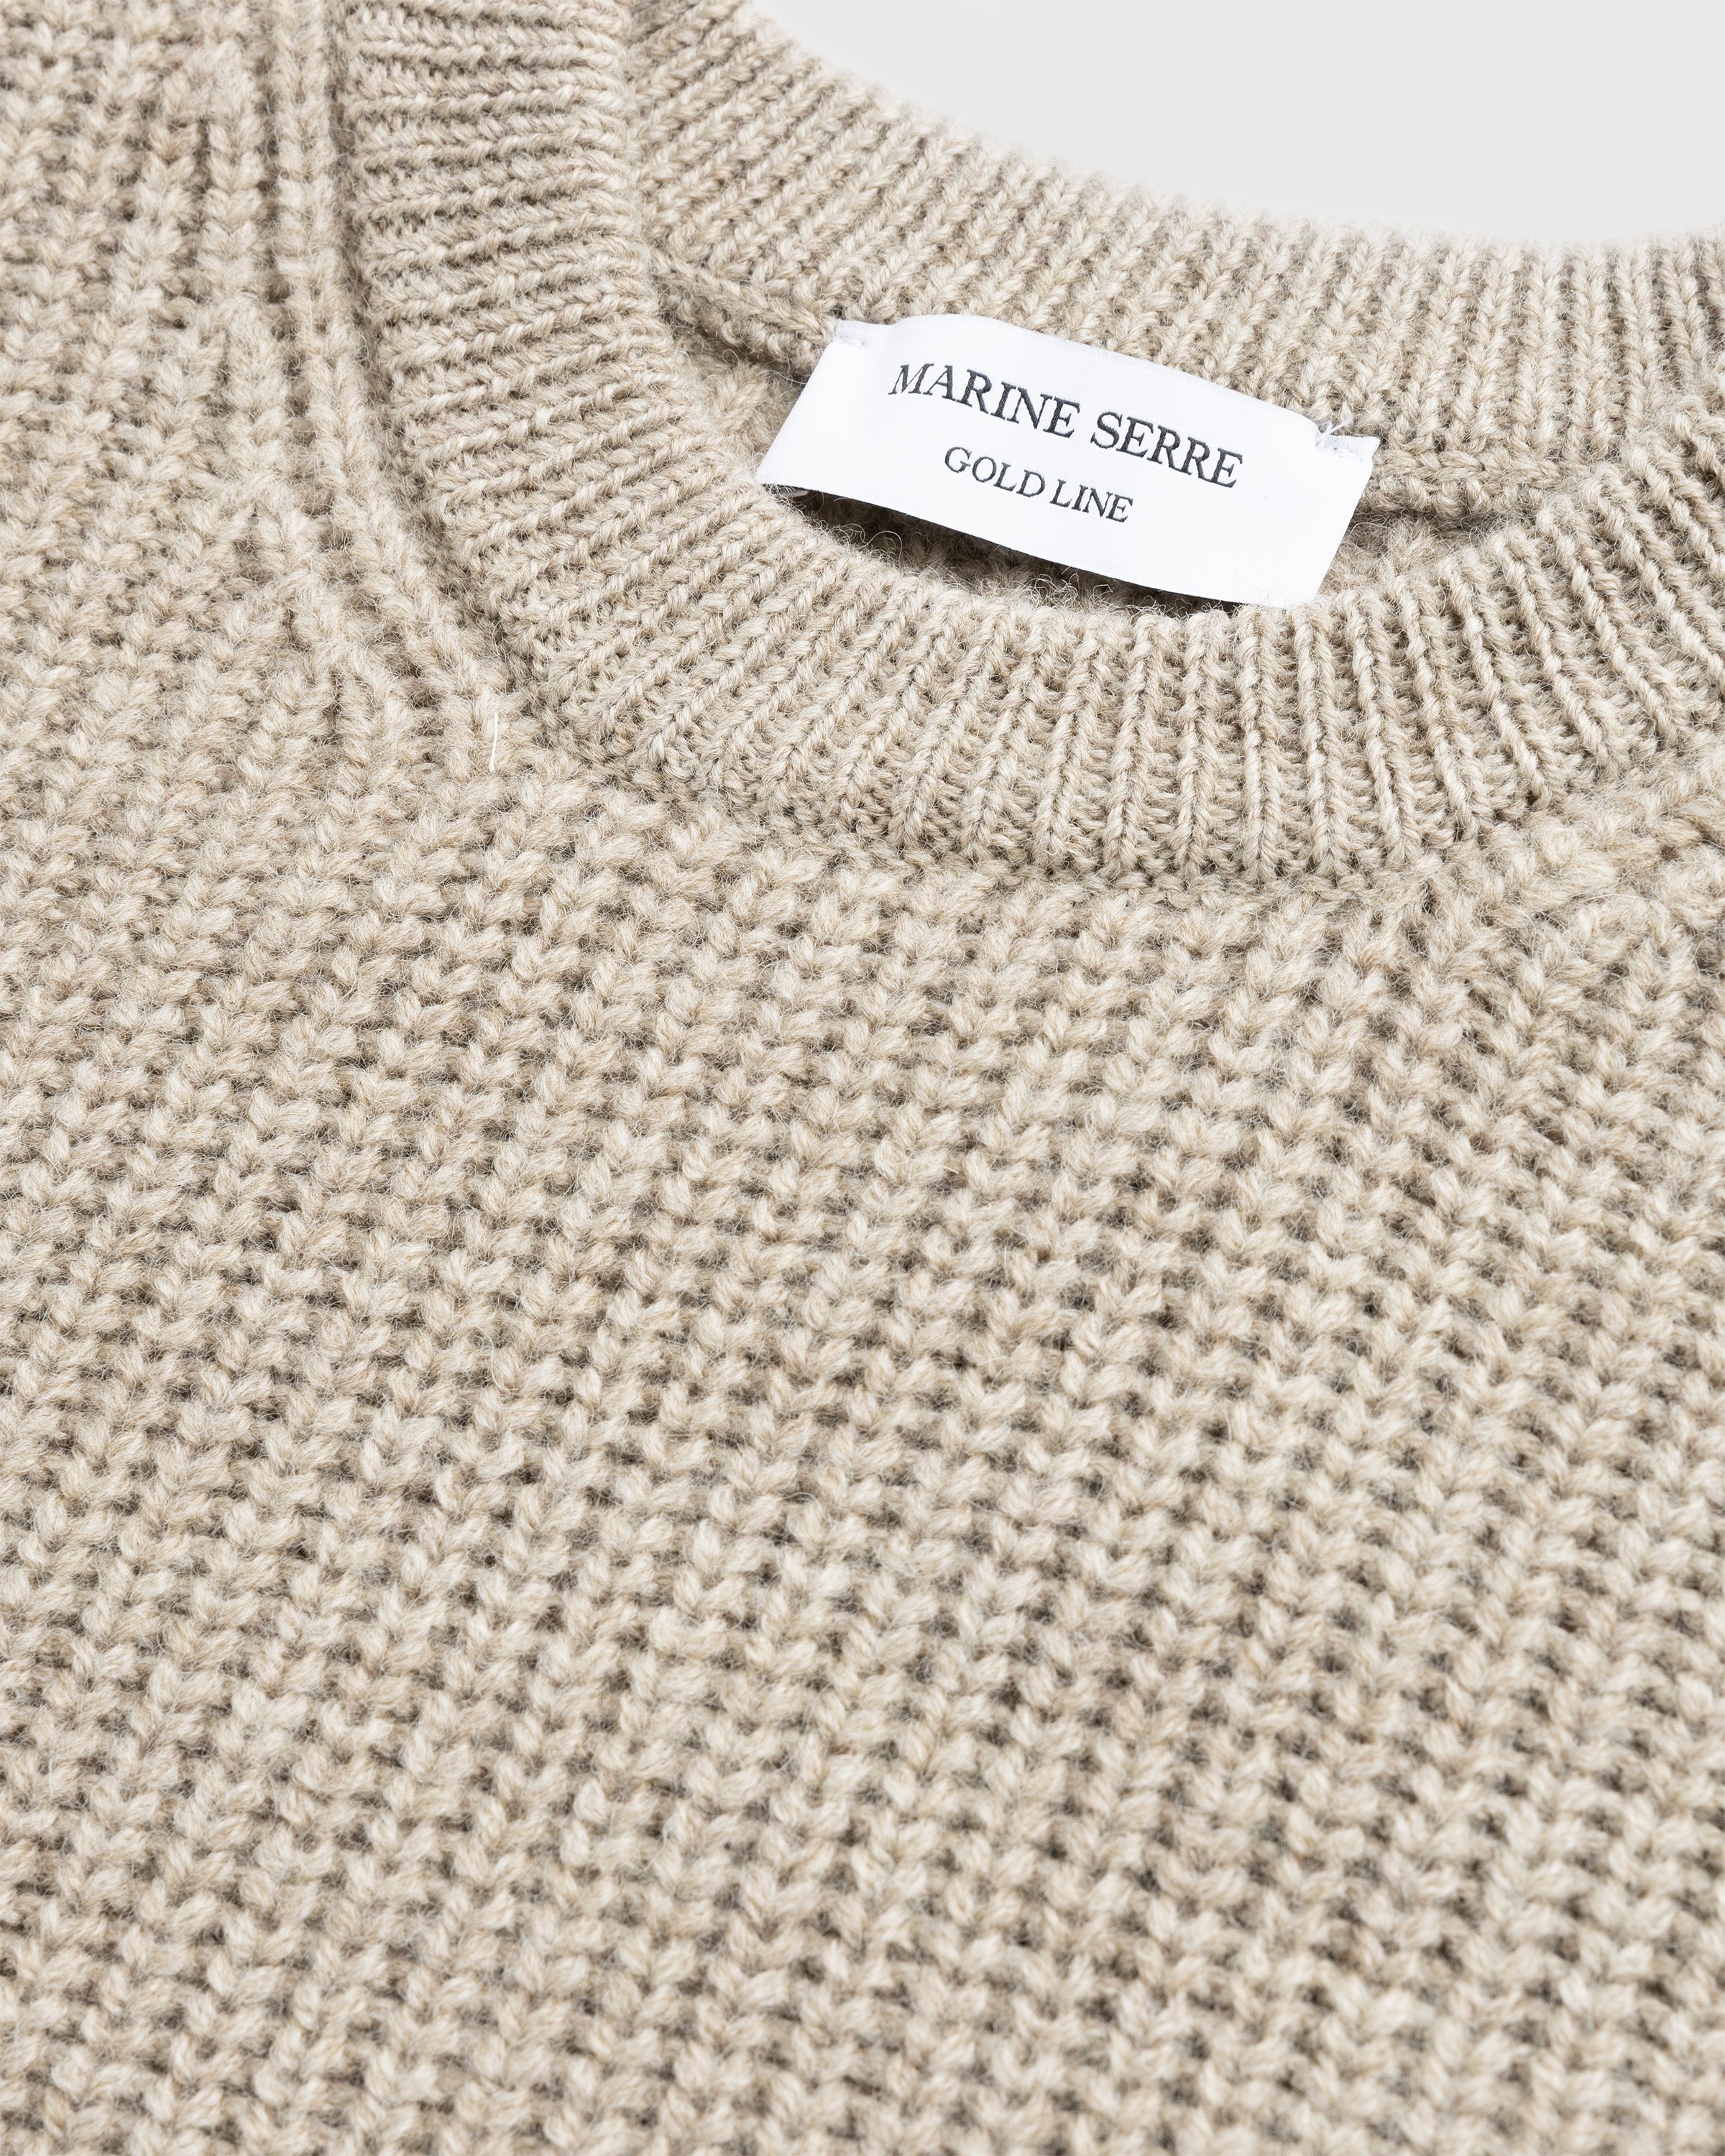 Marine Serre - Wool and Fluffy Knit Crewneck Pullover Beige - Clothing - undefined - Image 7